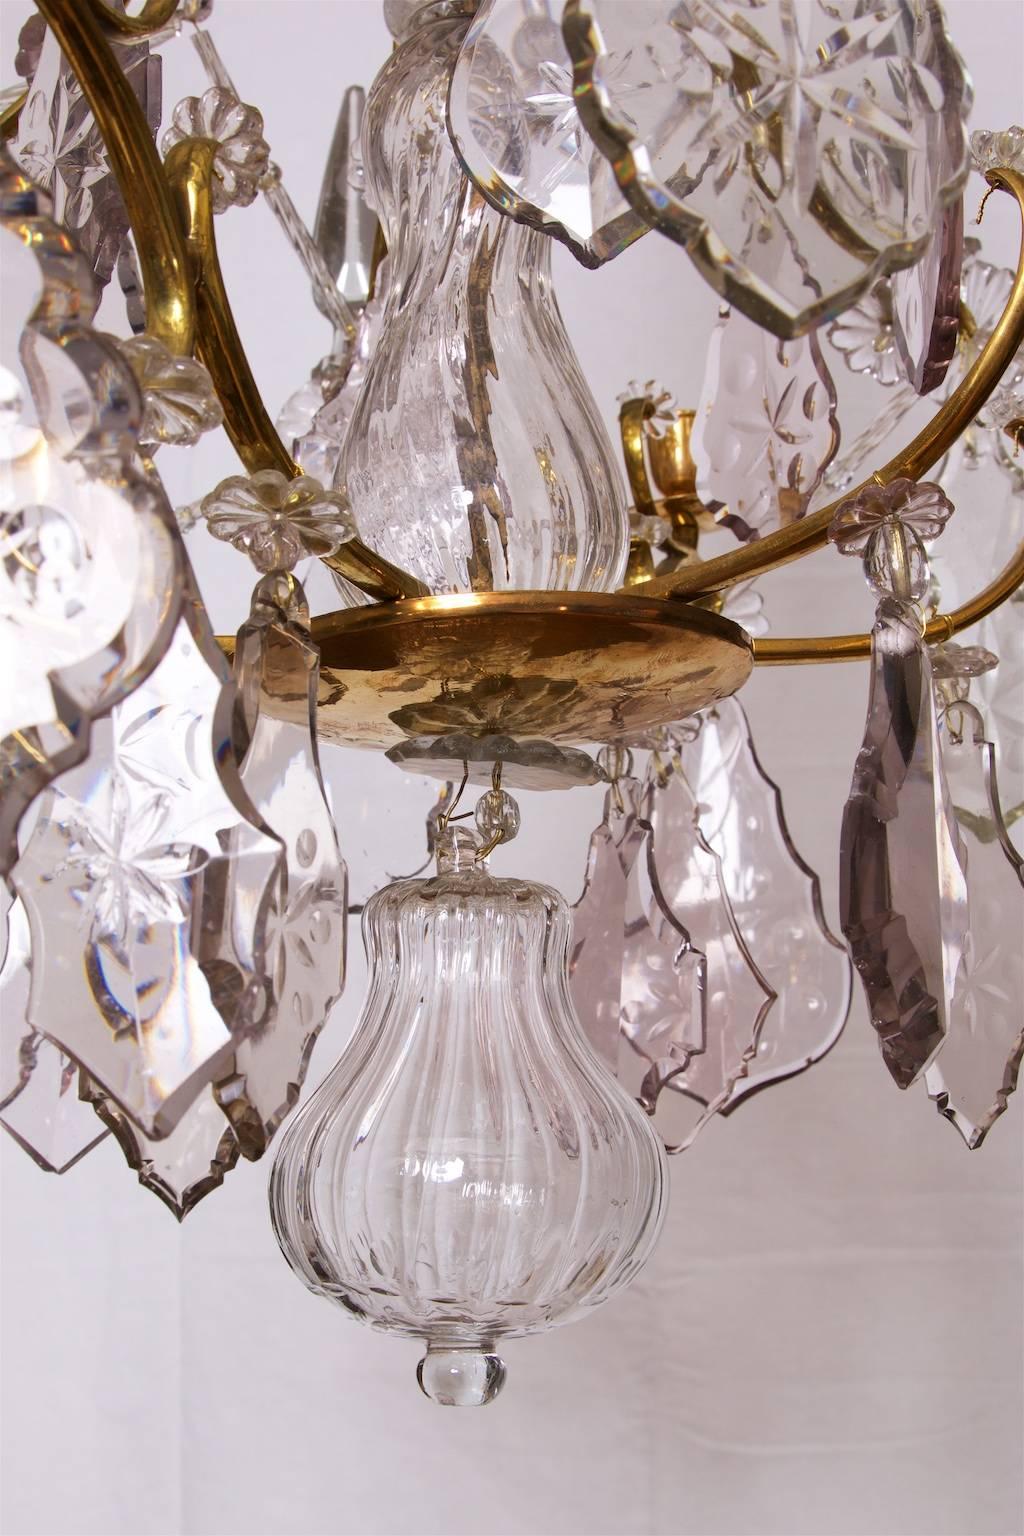 Swedish Crystal Chandelier Made for Six Candles, Rococo, circa 1770 In Good Condition For Sale In Malmo, SE